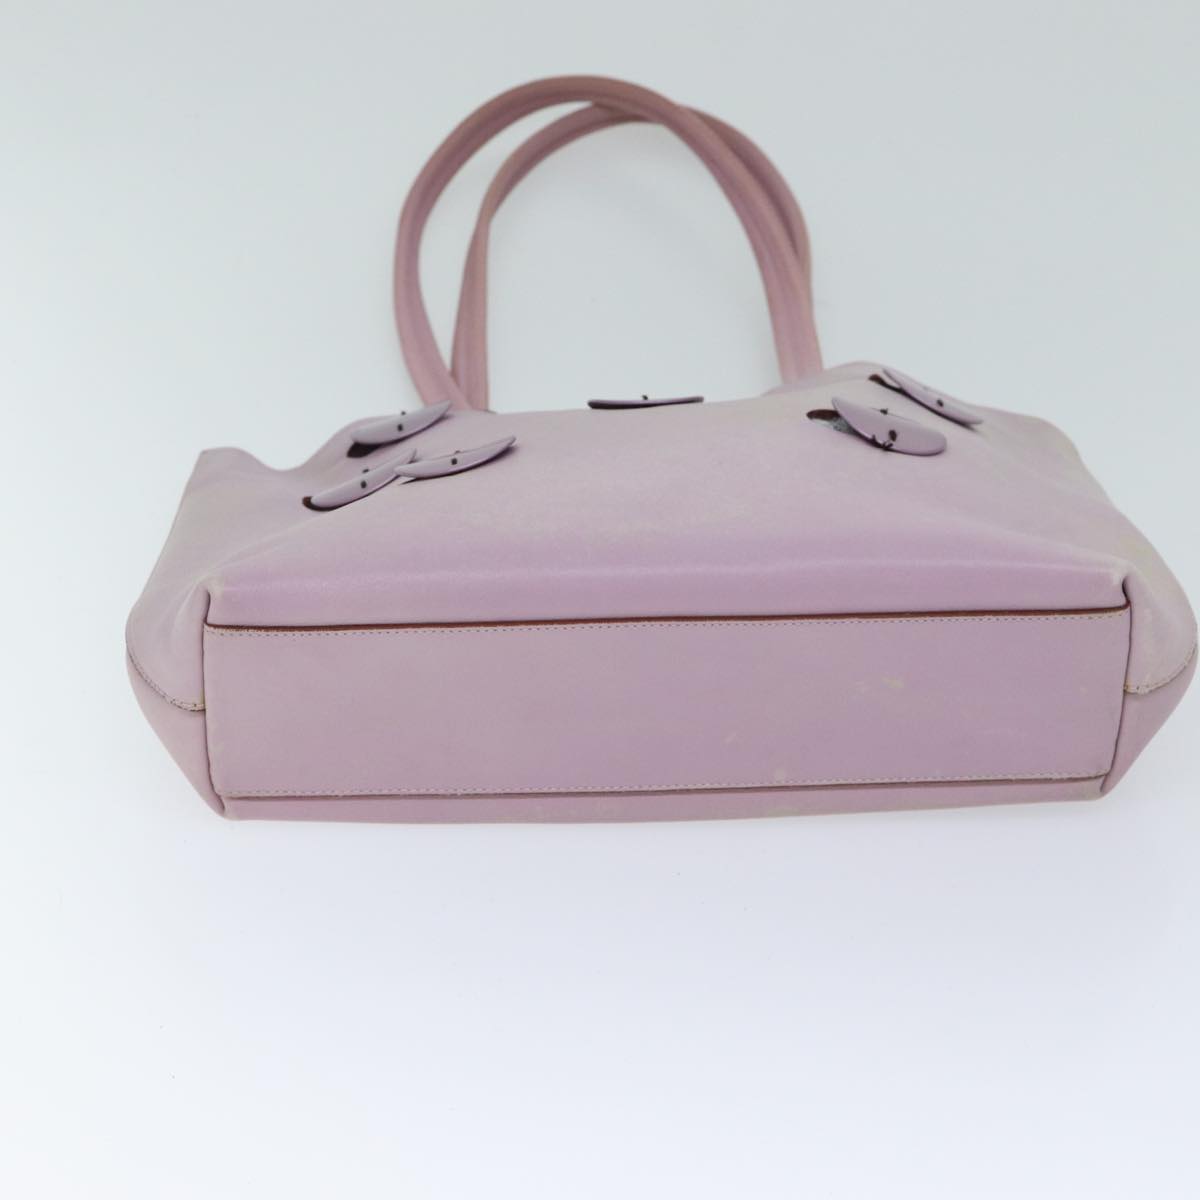 PRADA Tote Bag Leather Pink Auth bs13284